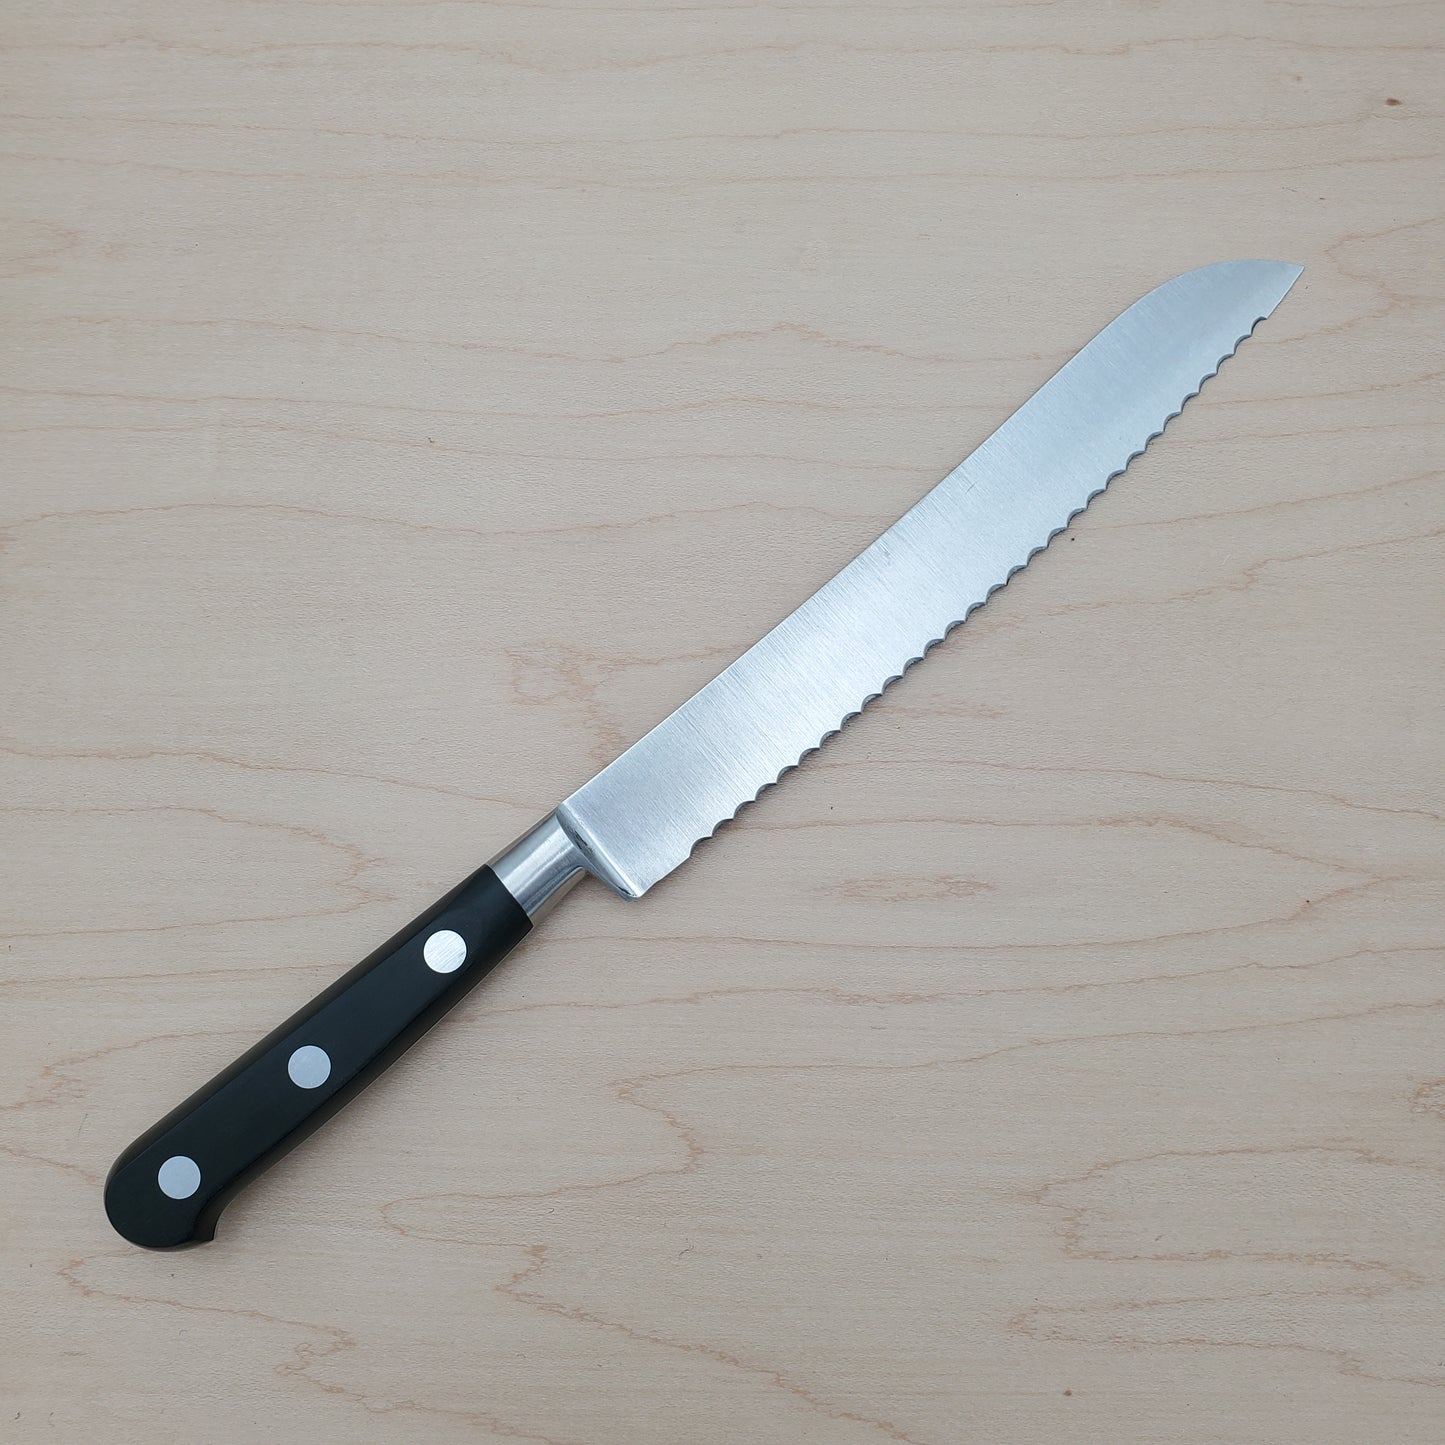 K Sabatier 8" Bread Knife Authentique Stainless